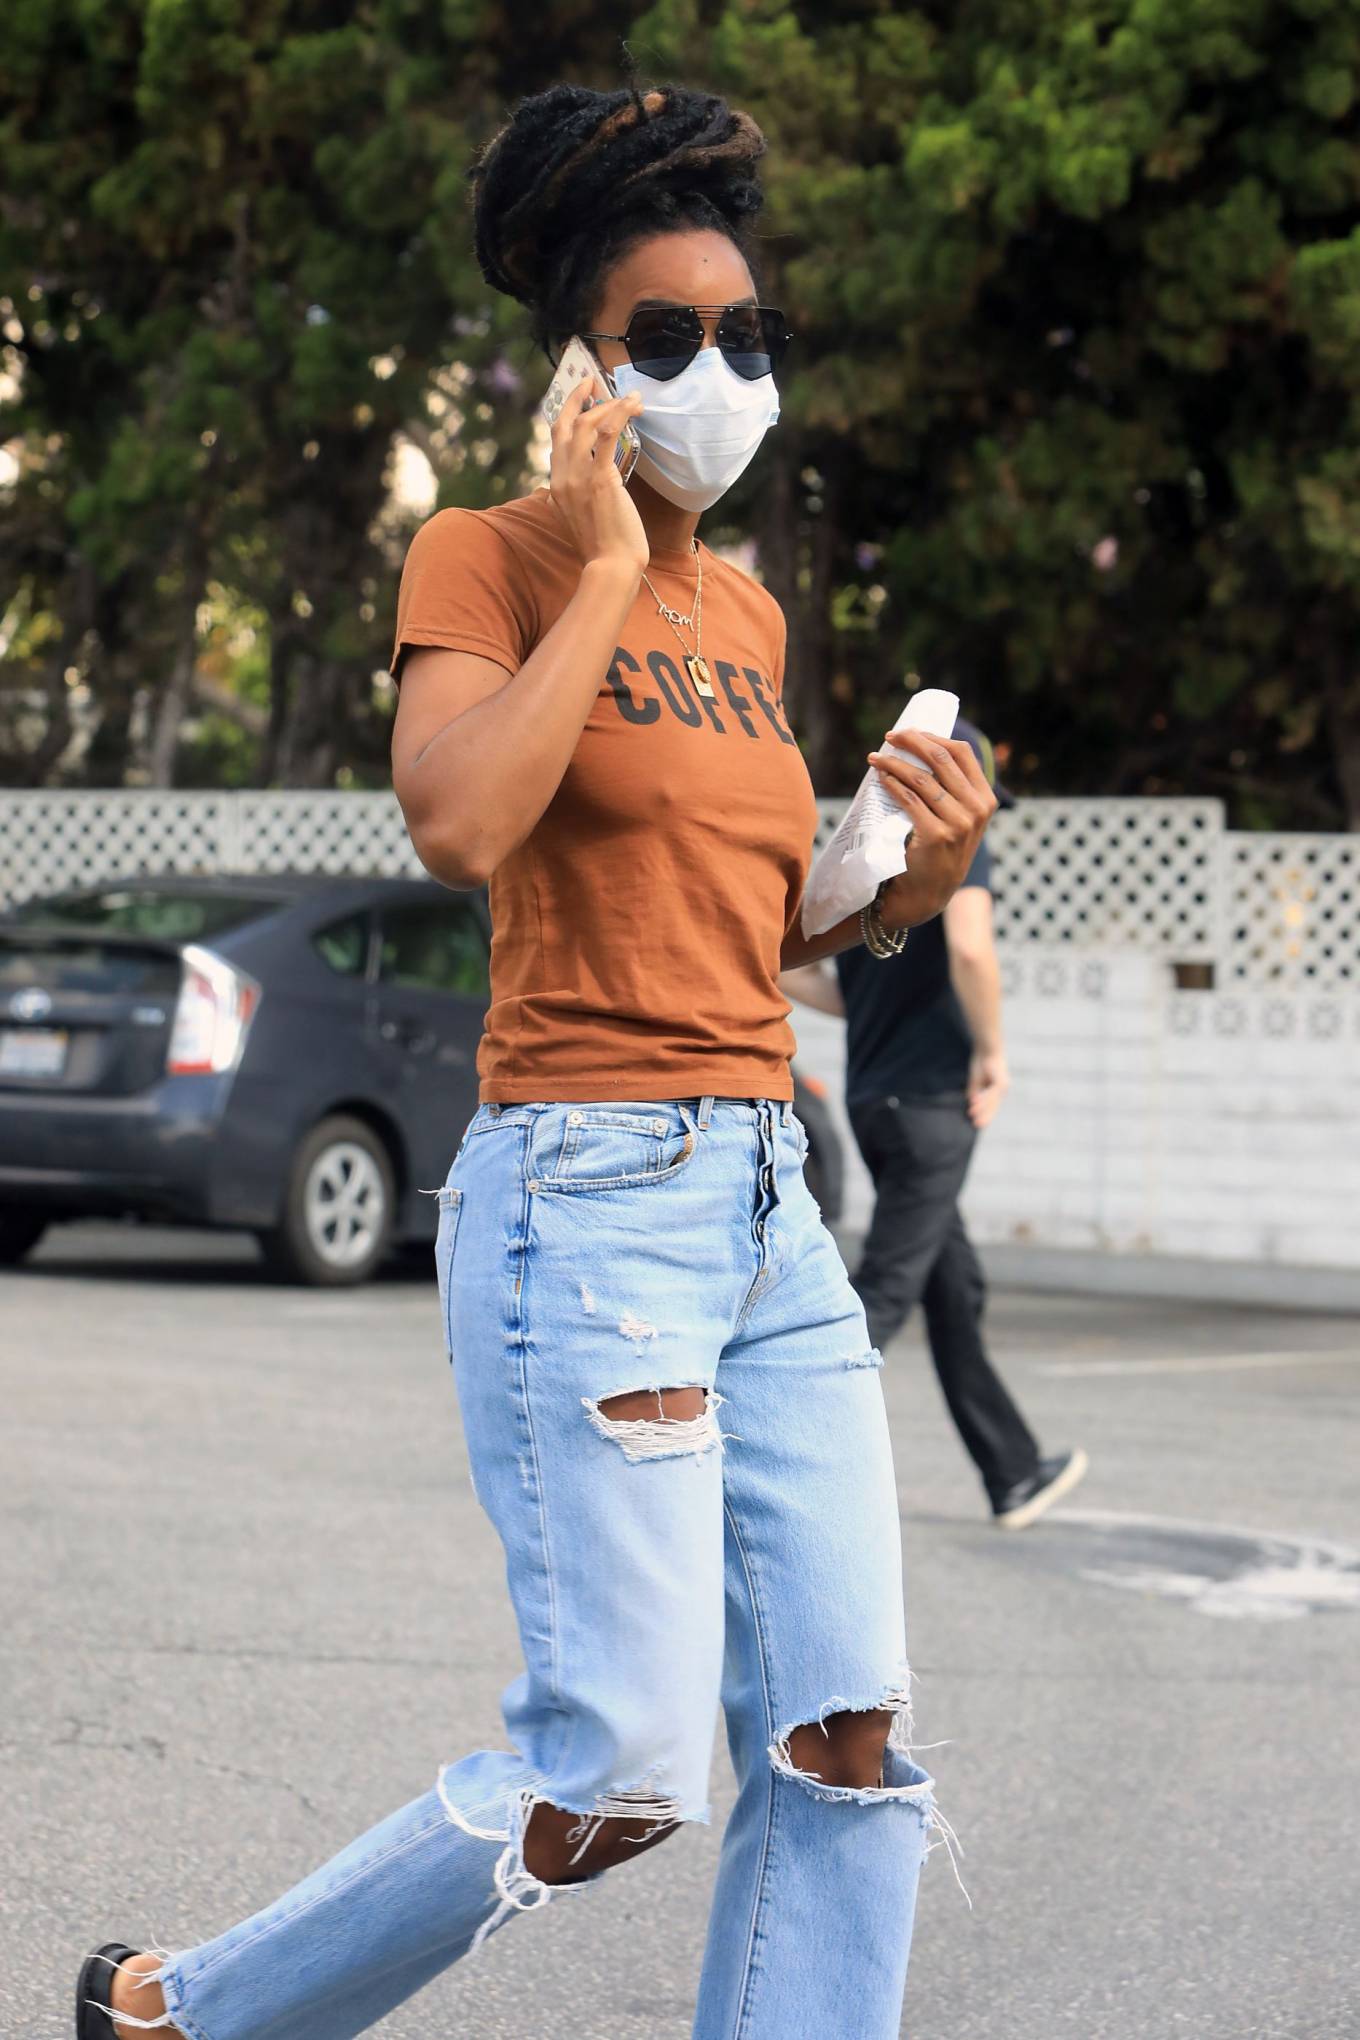 Kelly Rowland in Ripped Jeans - Shopping for house plants in LA. 